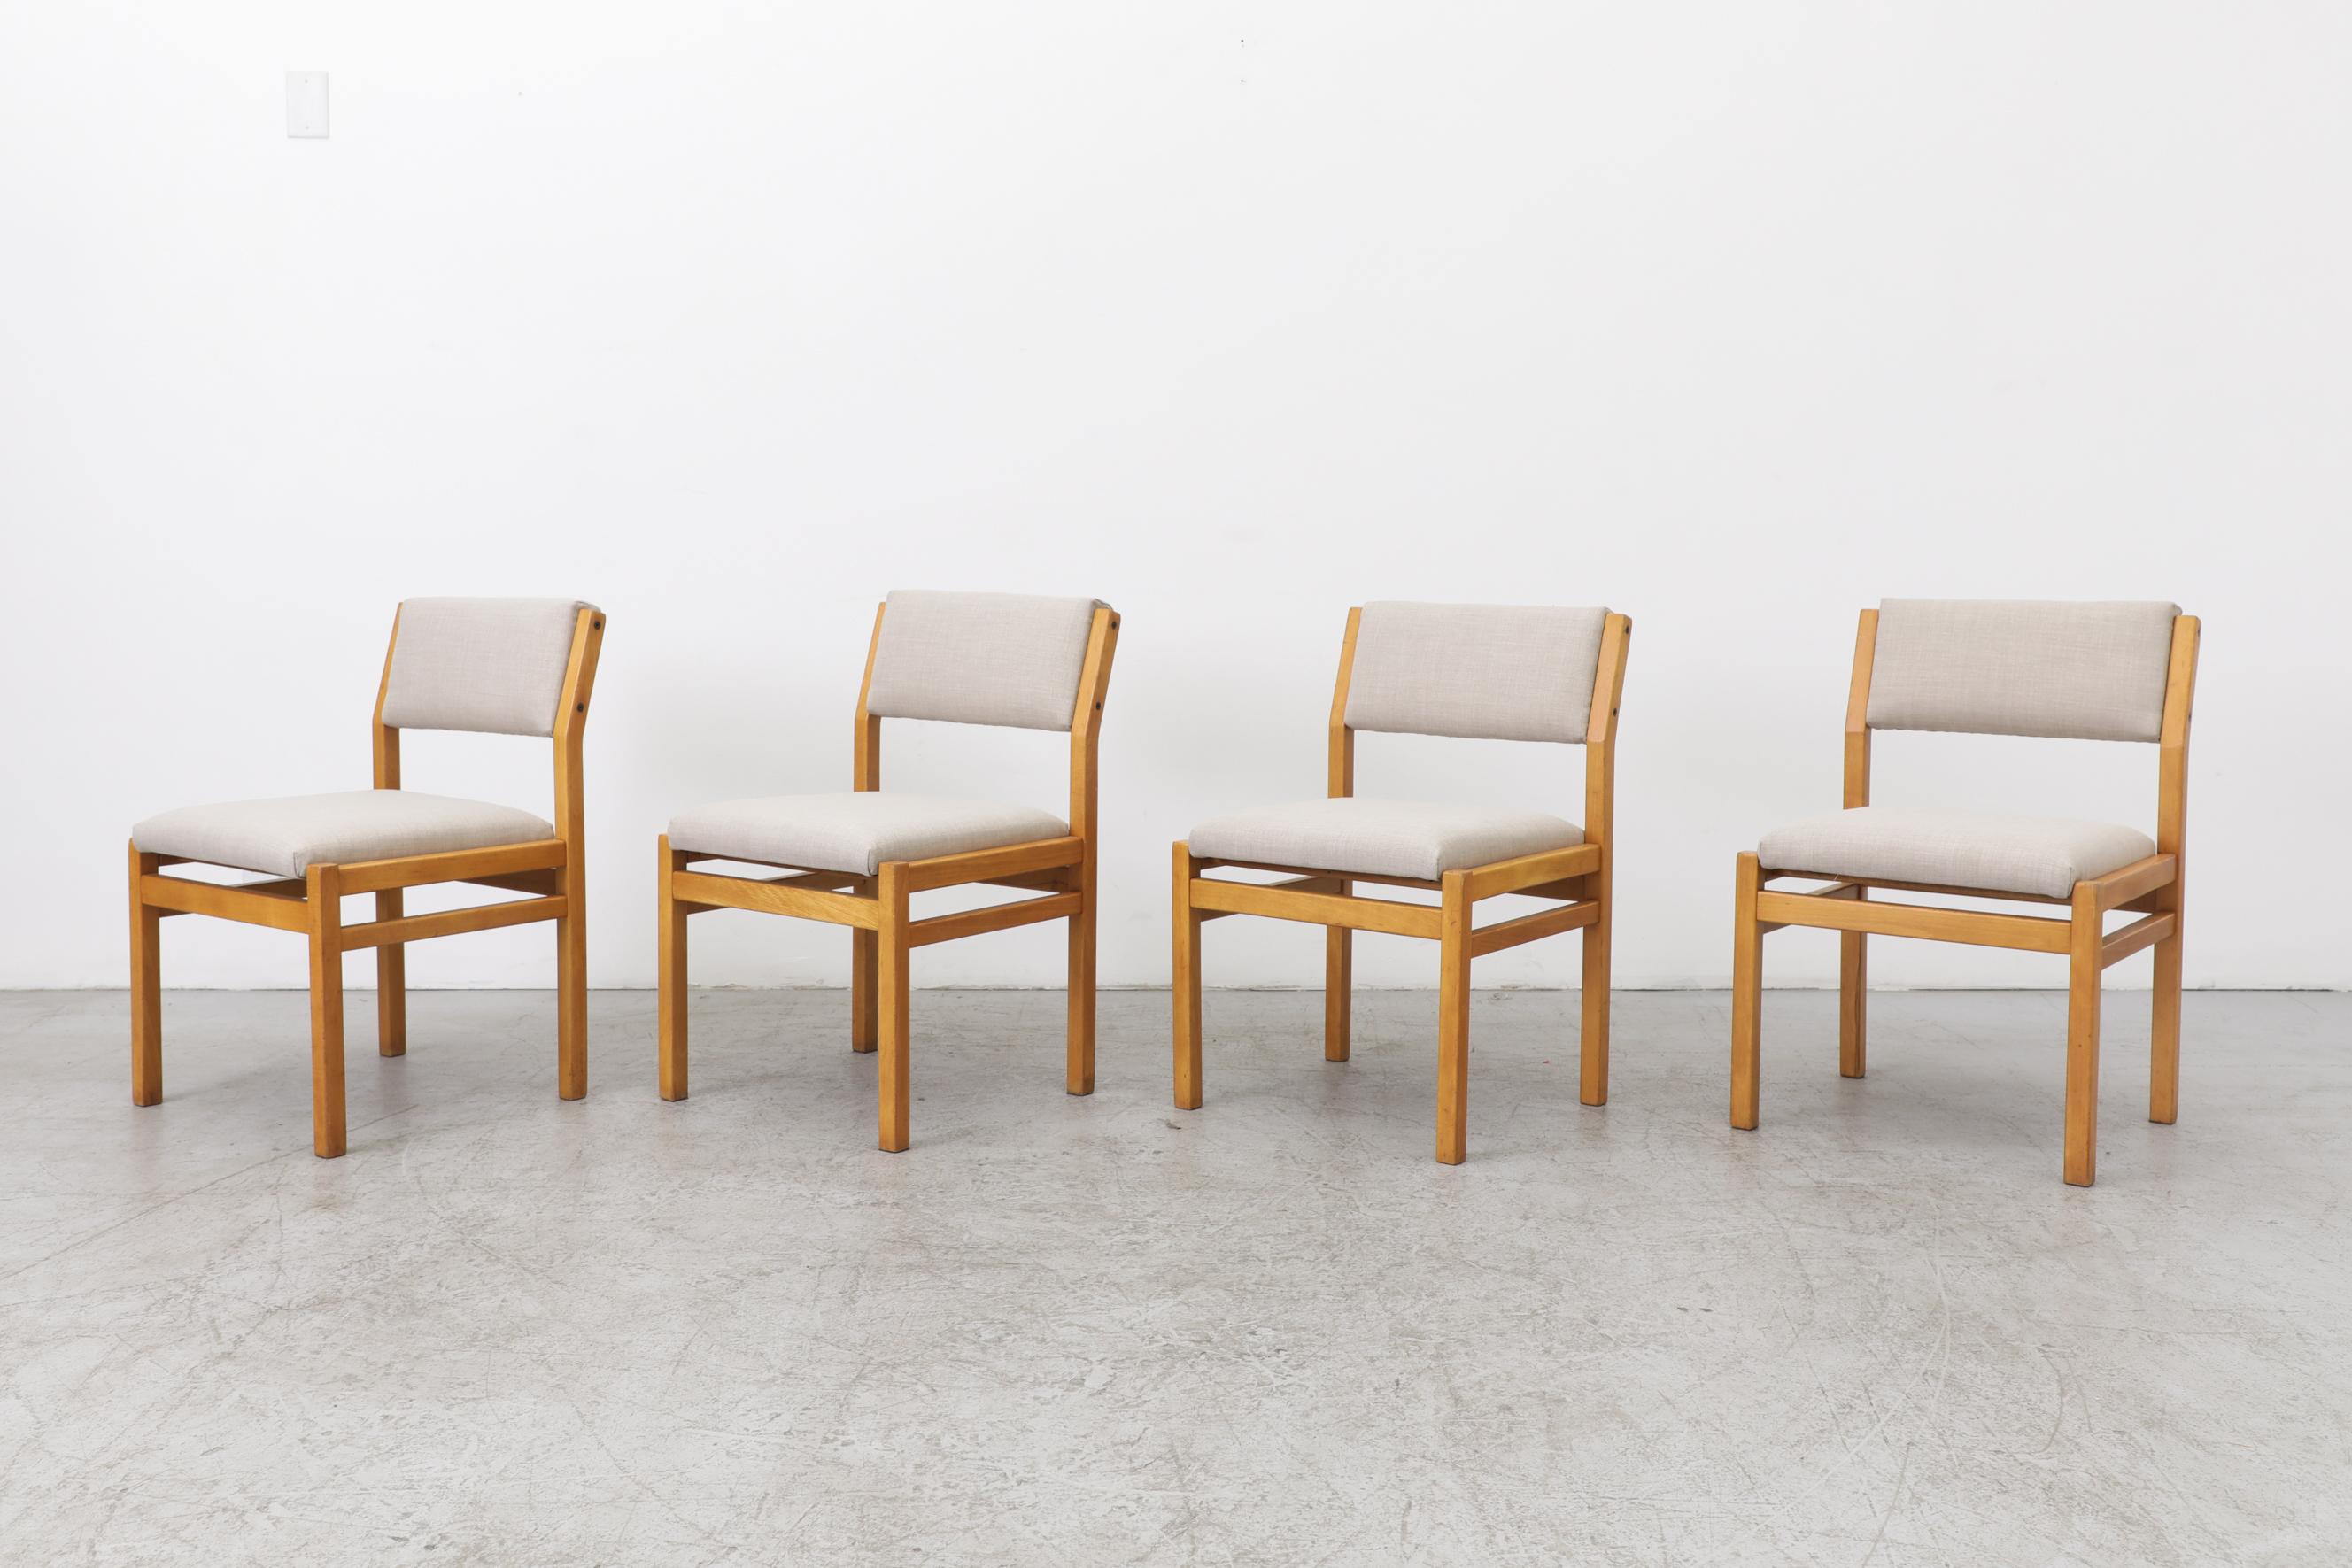 Set of 4 SA07 blonde Japanese series 1960s dining chairs by Cees Braakman for Pastoe with They're minimal, yet functional and comfortable. One year before taking on the lead role at Pastoe, Braakman visited the United States to gain an insight into